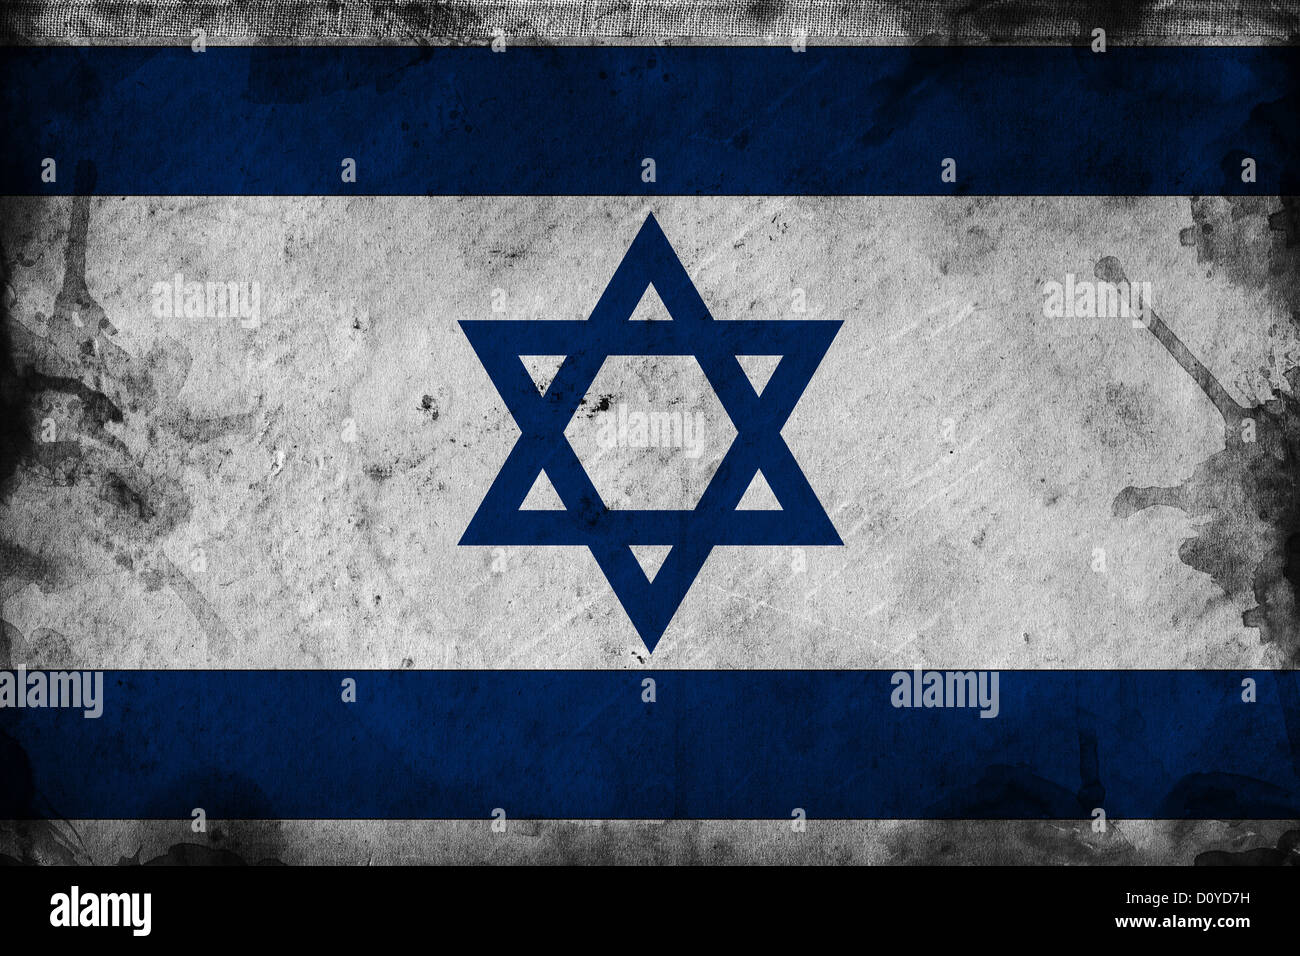 Grunge flag of Israel, image is overlaying a detailed grungy texture Stock Photo